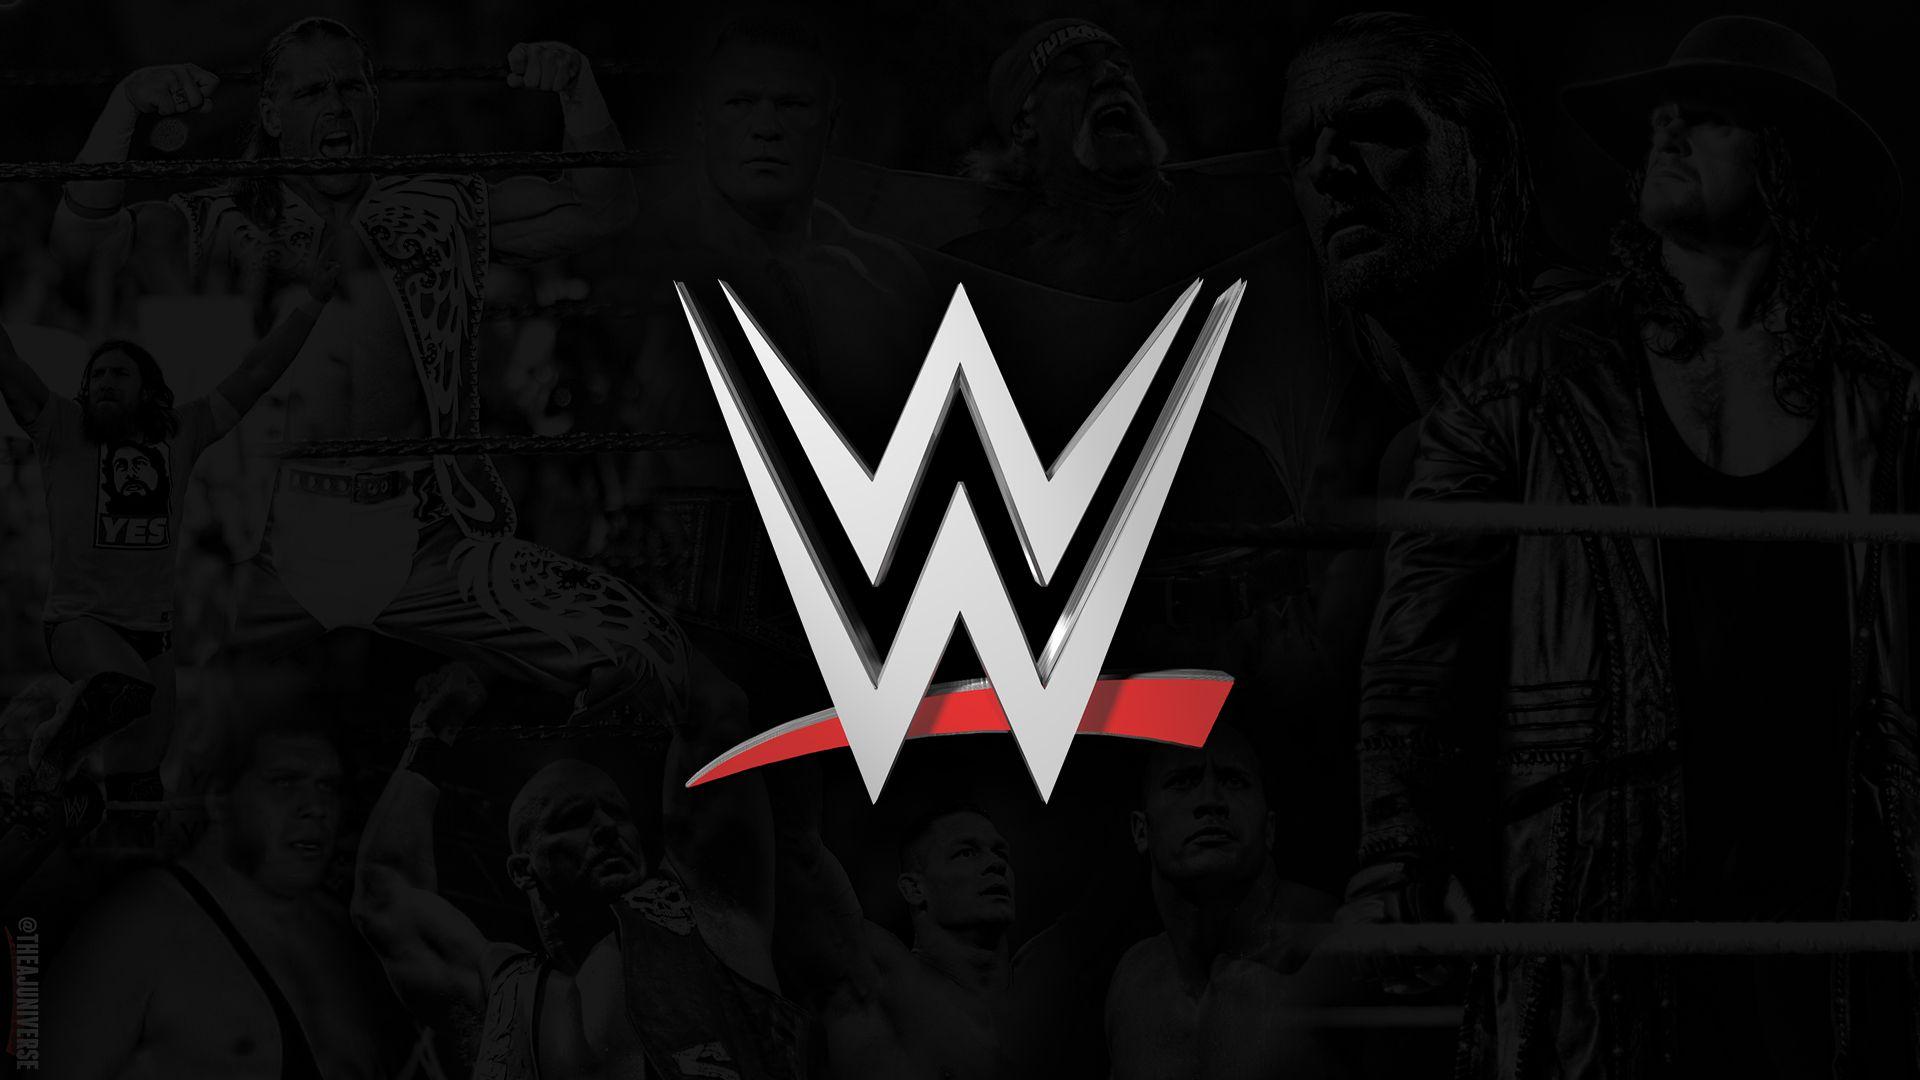 WWE background I made.Maybe one of you will like it